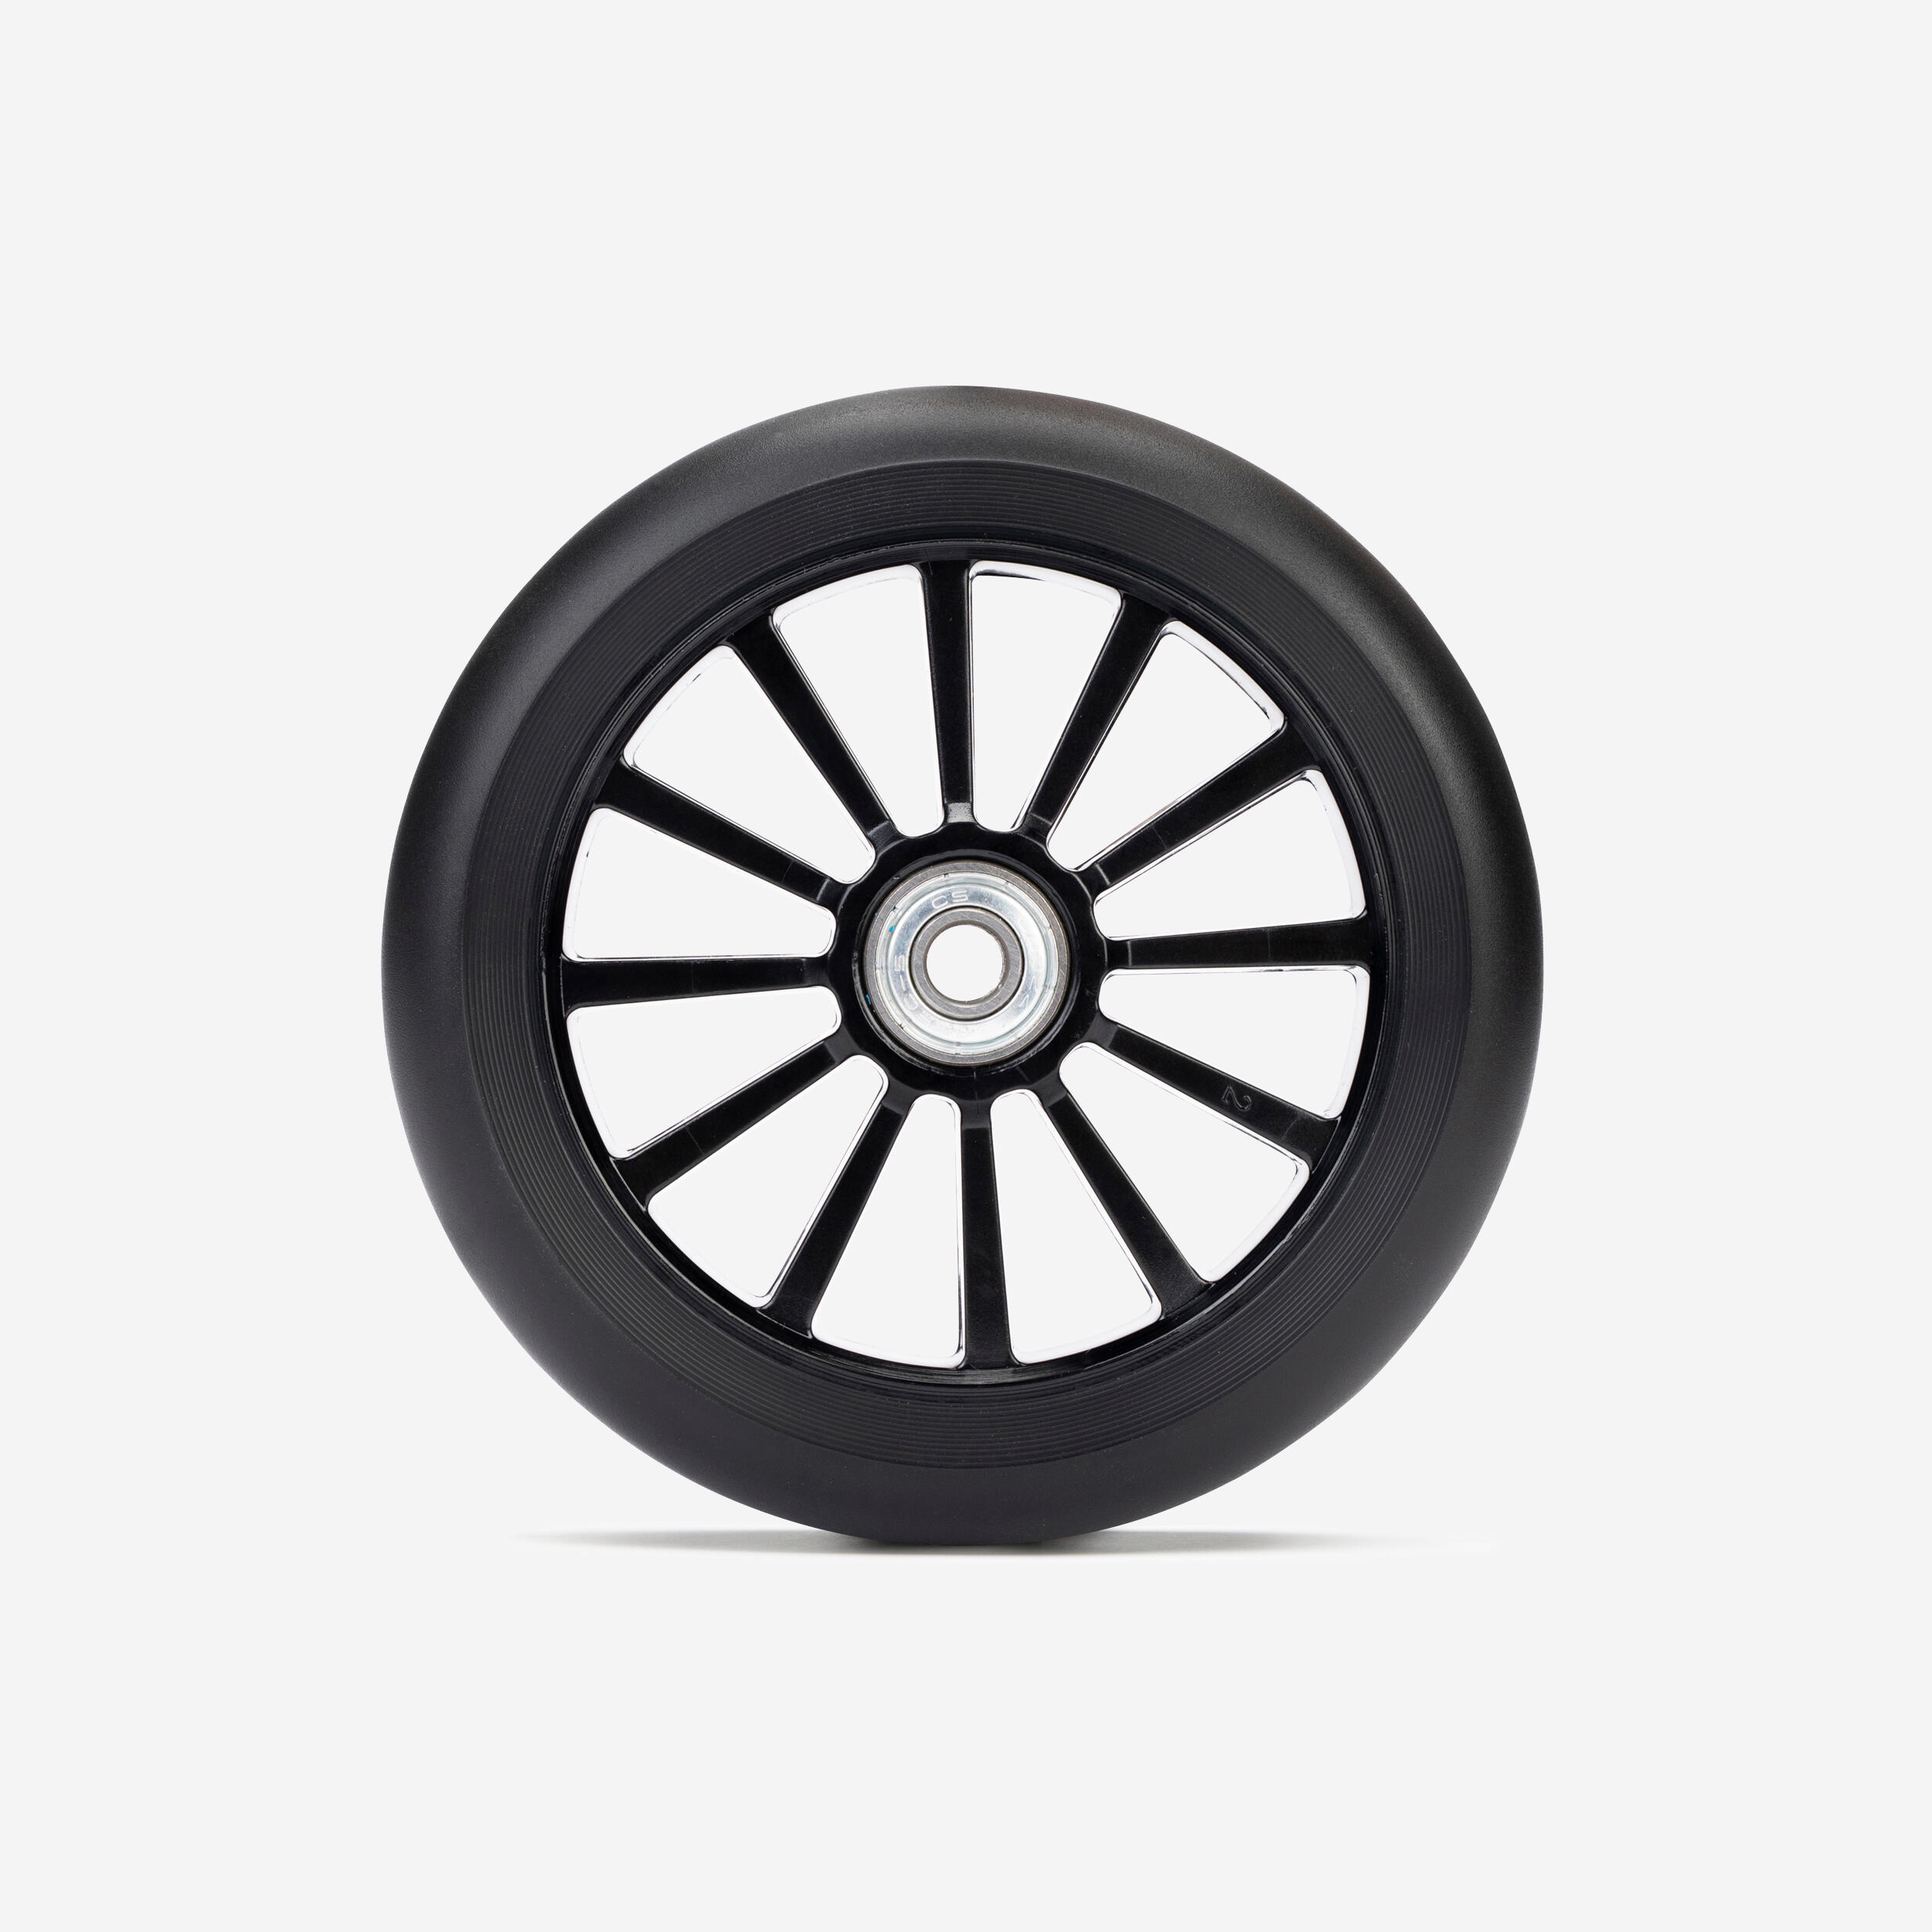 1 Wheel + Bearing for MID 1, MID 3, MID 5, PLAY 3 and PLAY 5 (front) Scooters 1/3